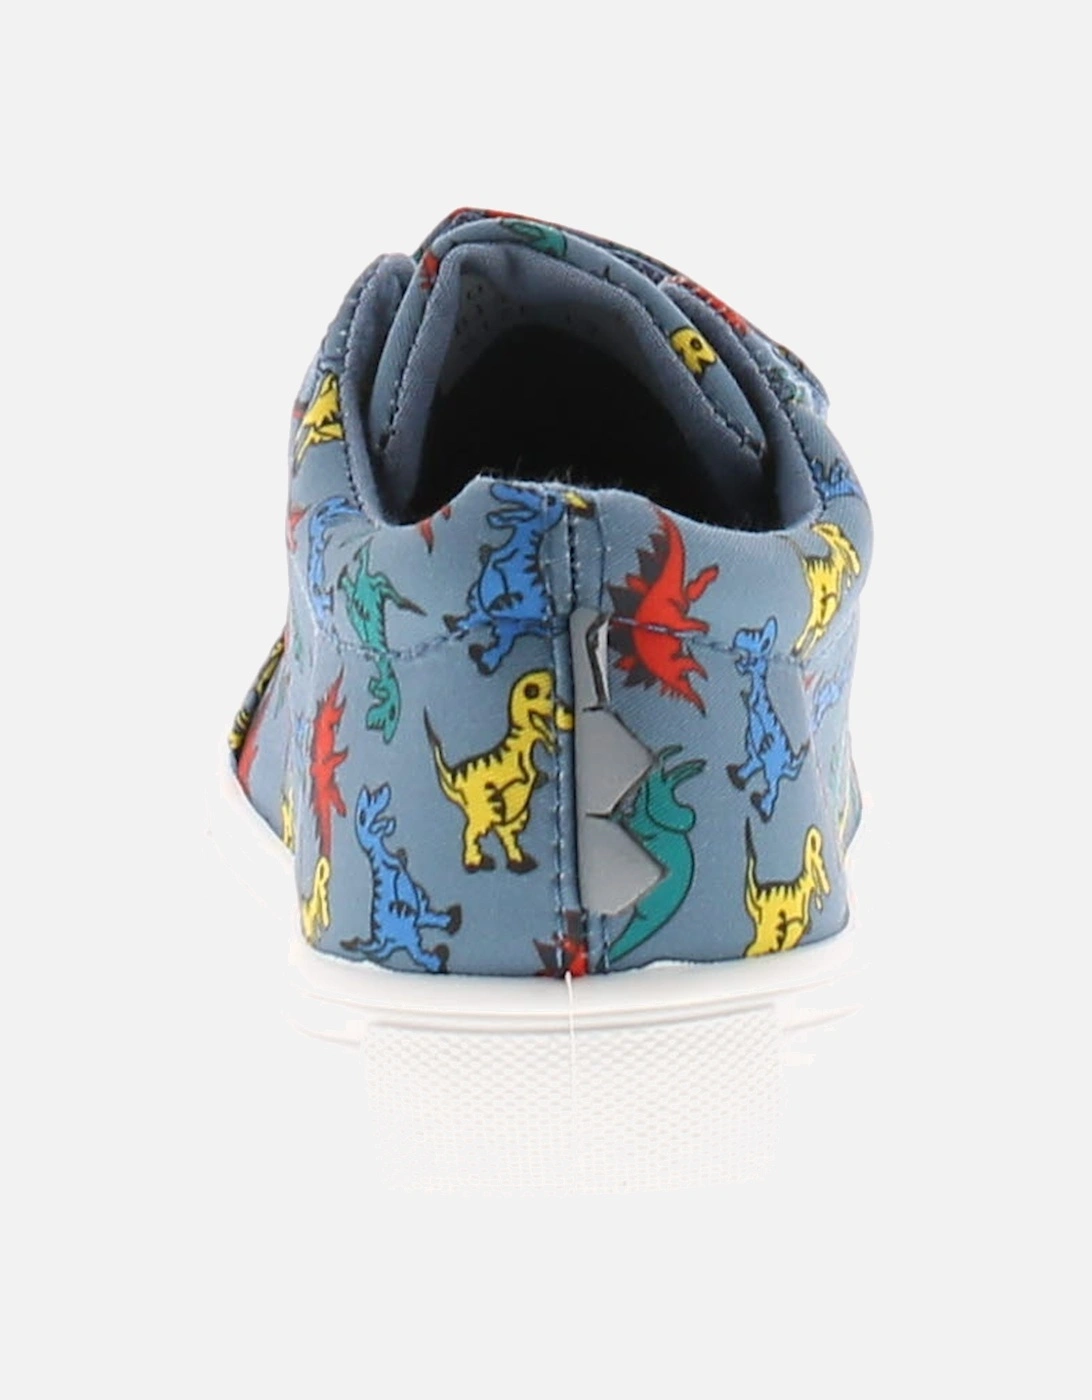 Younger Childrens Shoes Canvas Deano blue UK Size